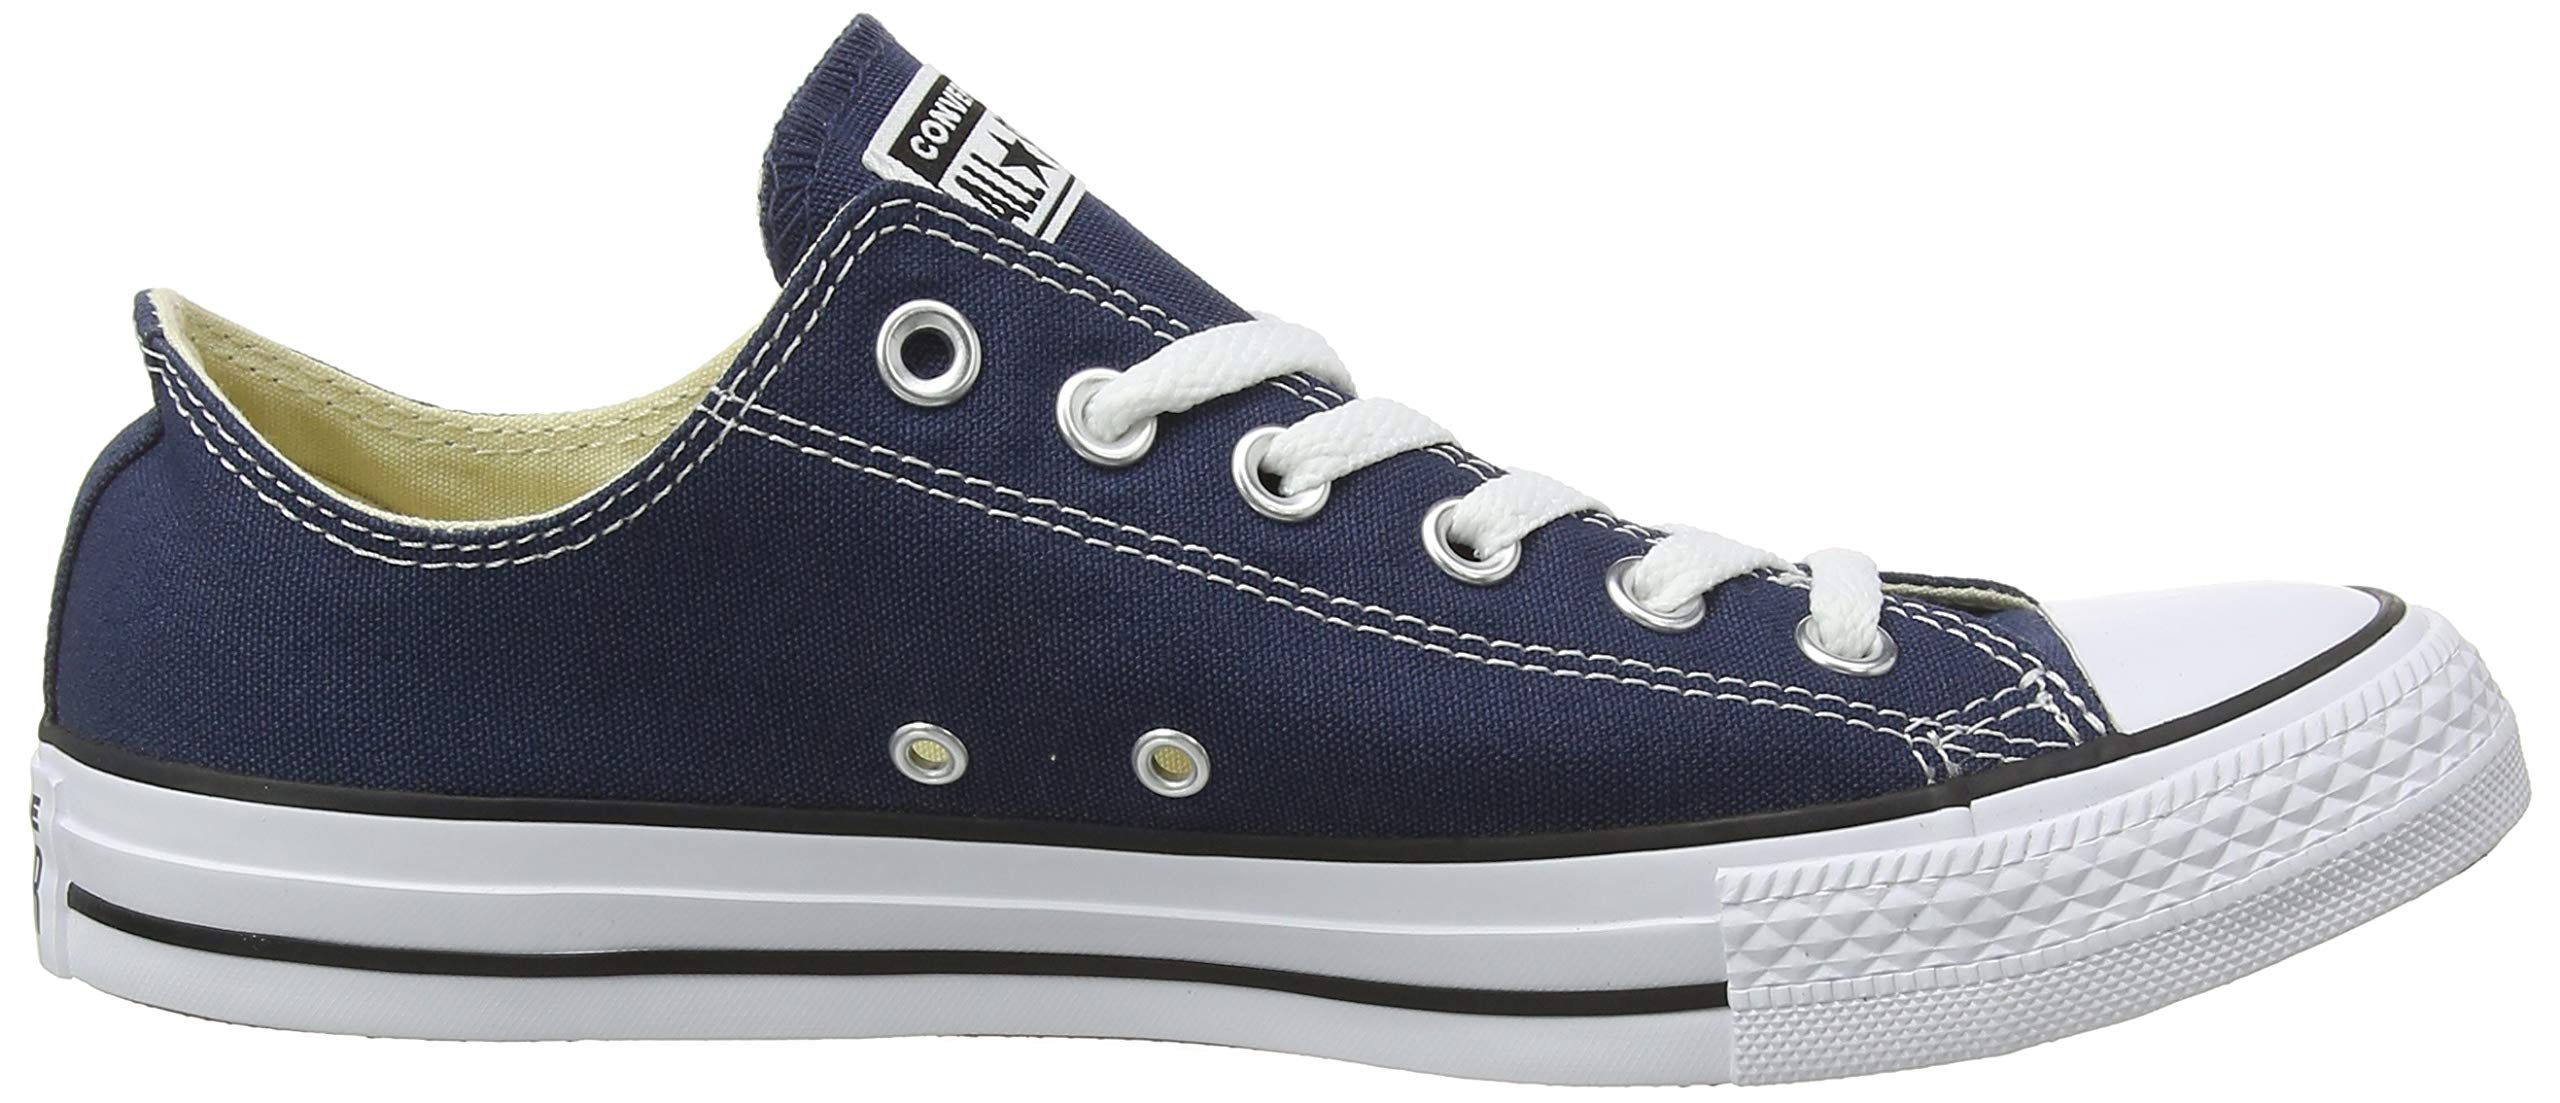 Converse All Star Ox Sneakers - image 2 of 15